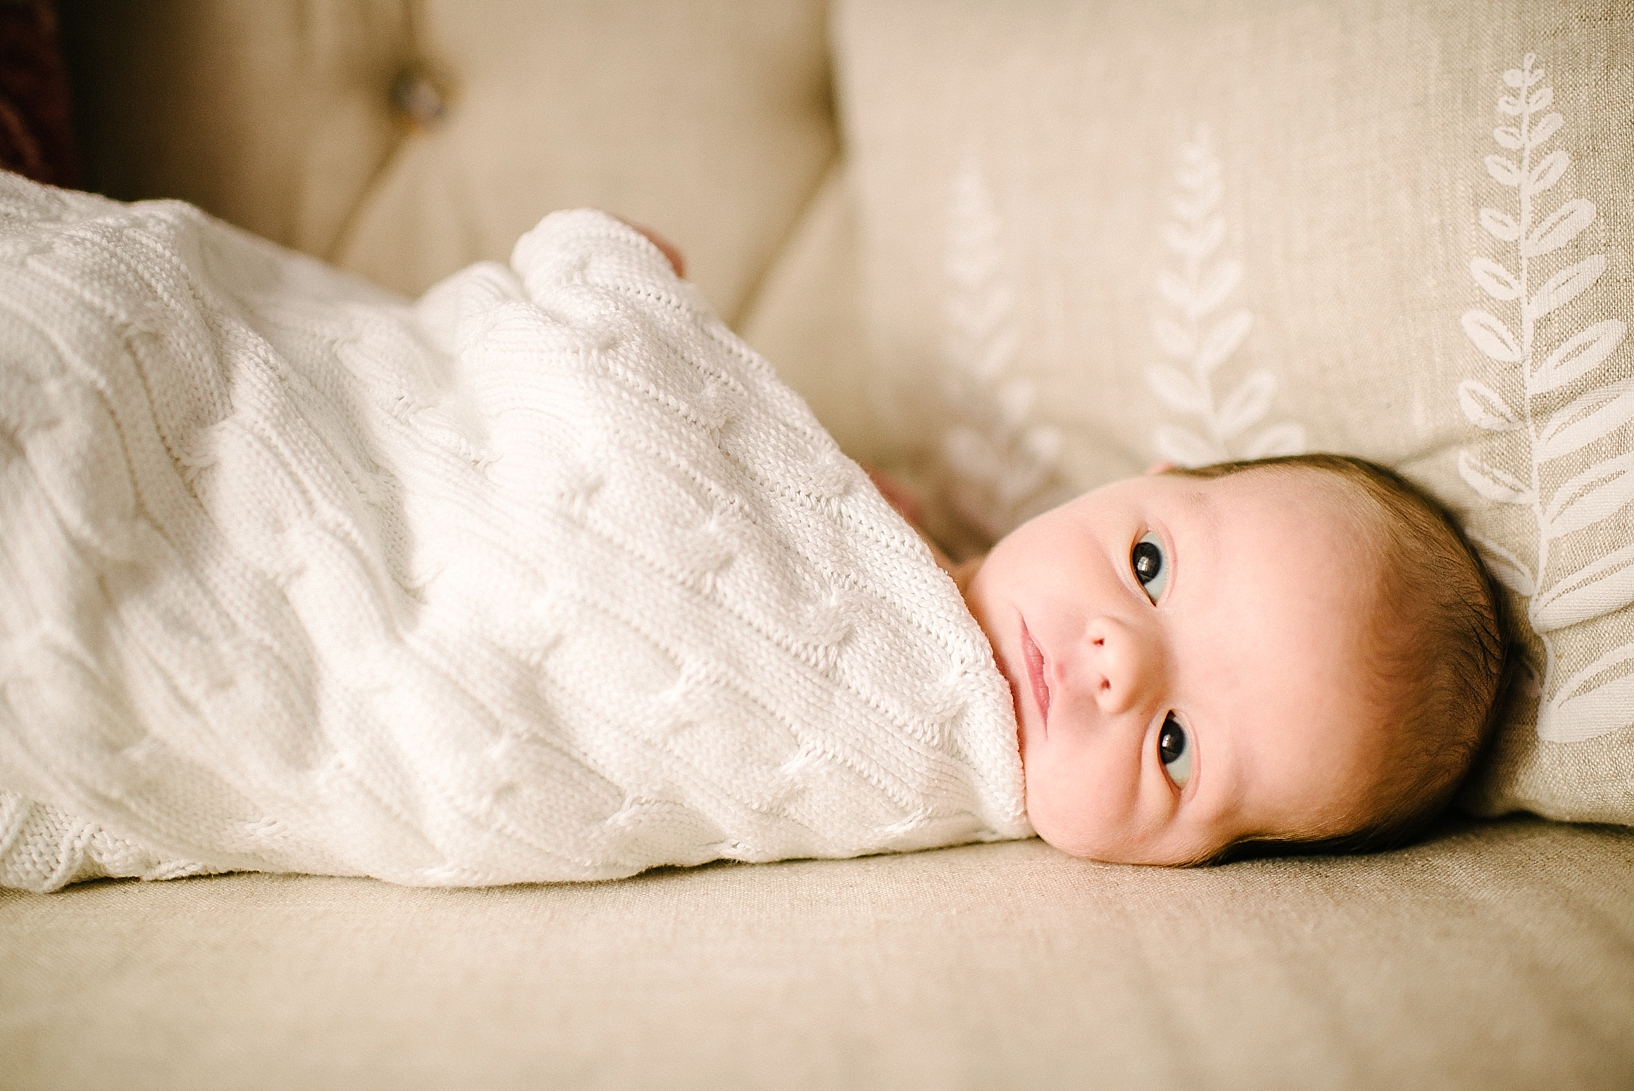 newborn baby wrapped in cable knit blanket on tan sofa